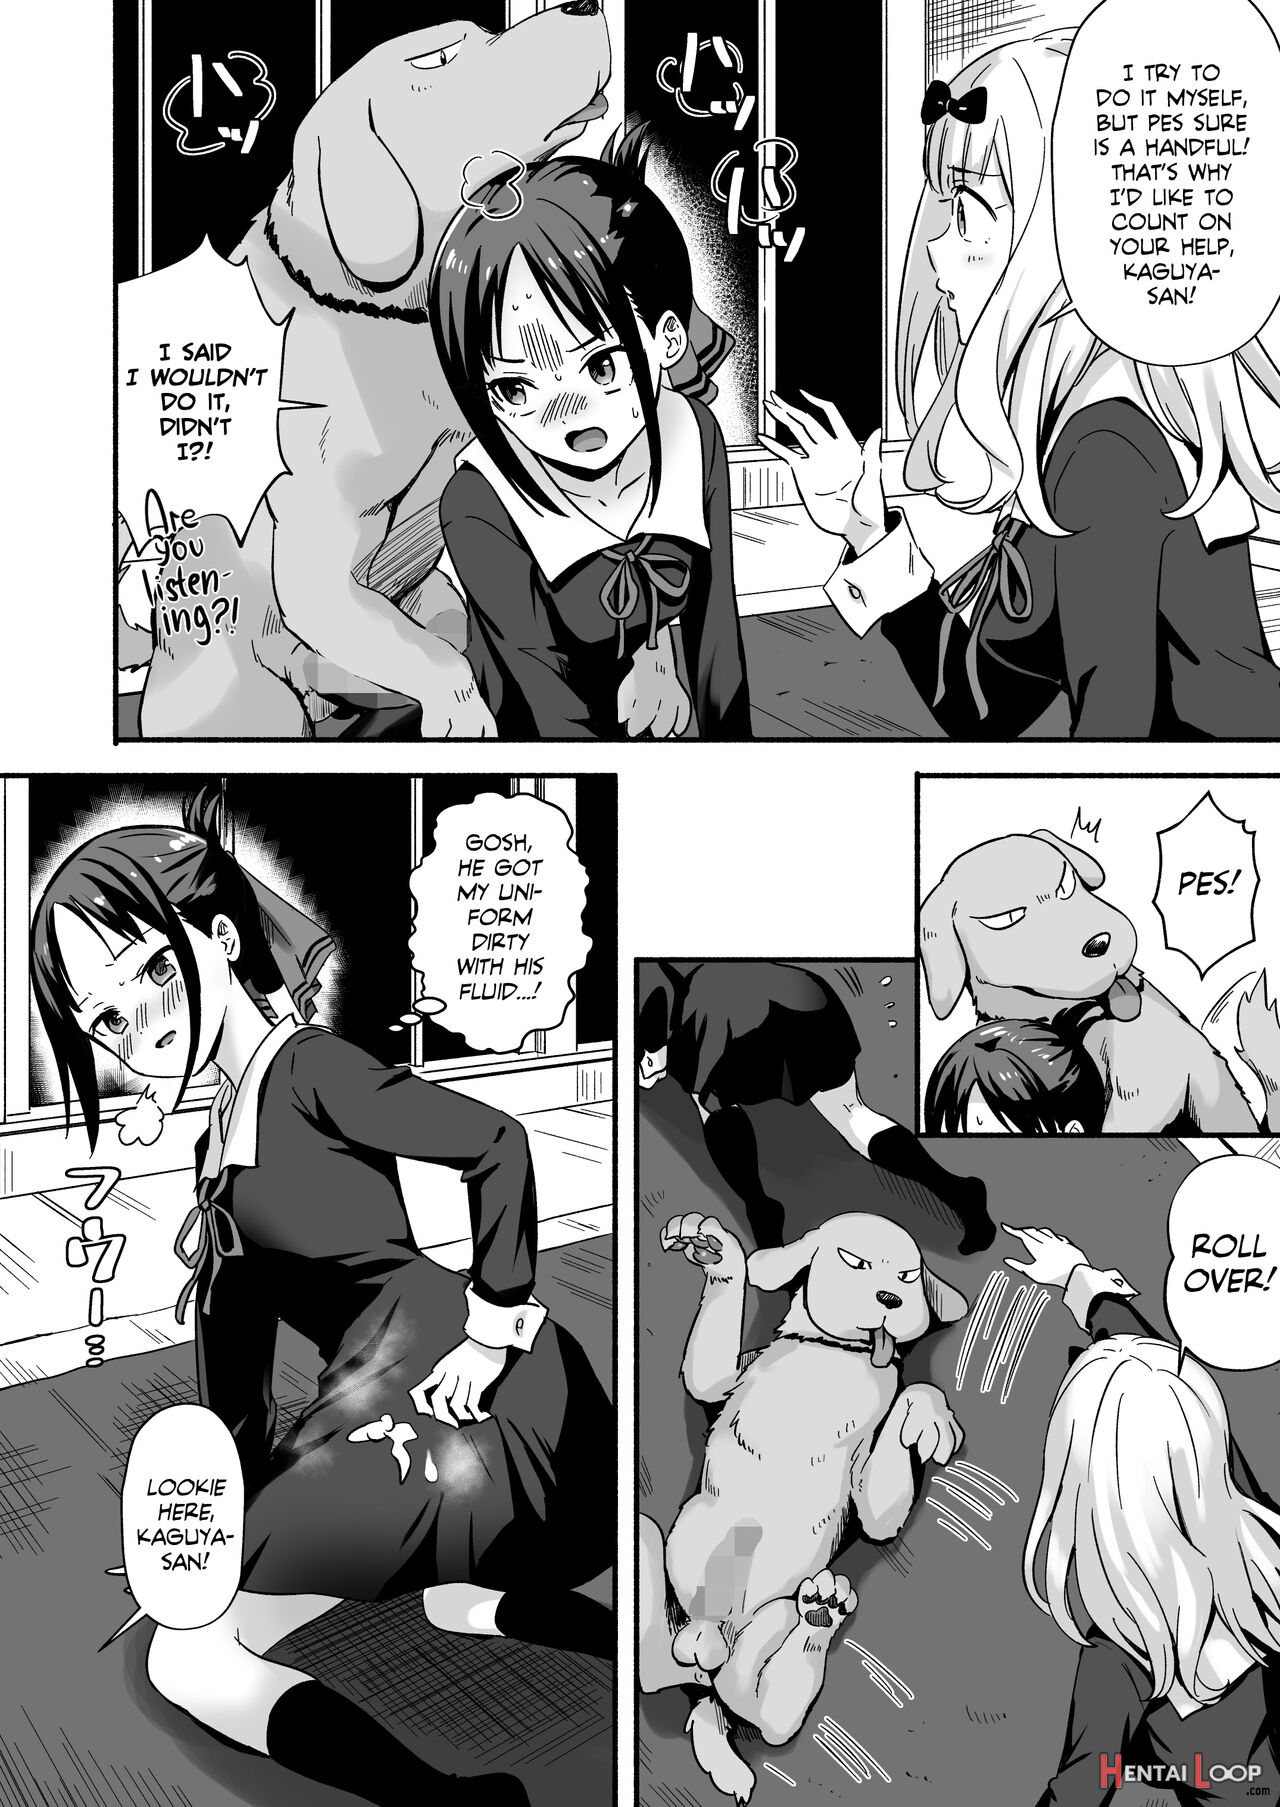 Kaguya-san Takes Care Of Pes's Sexual Urges! page 5